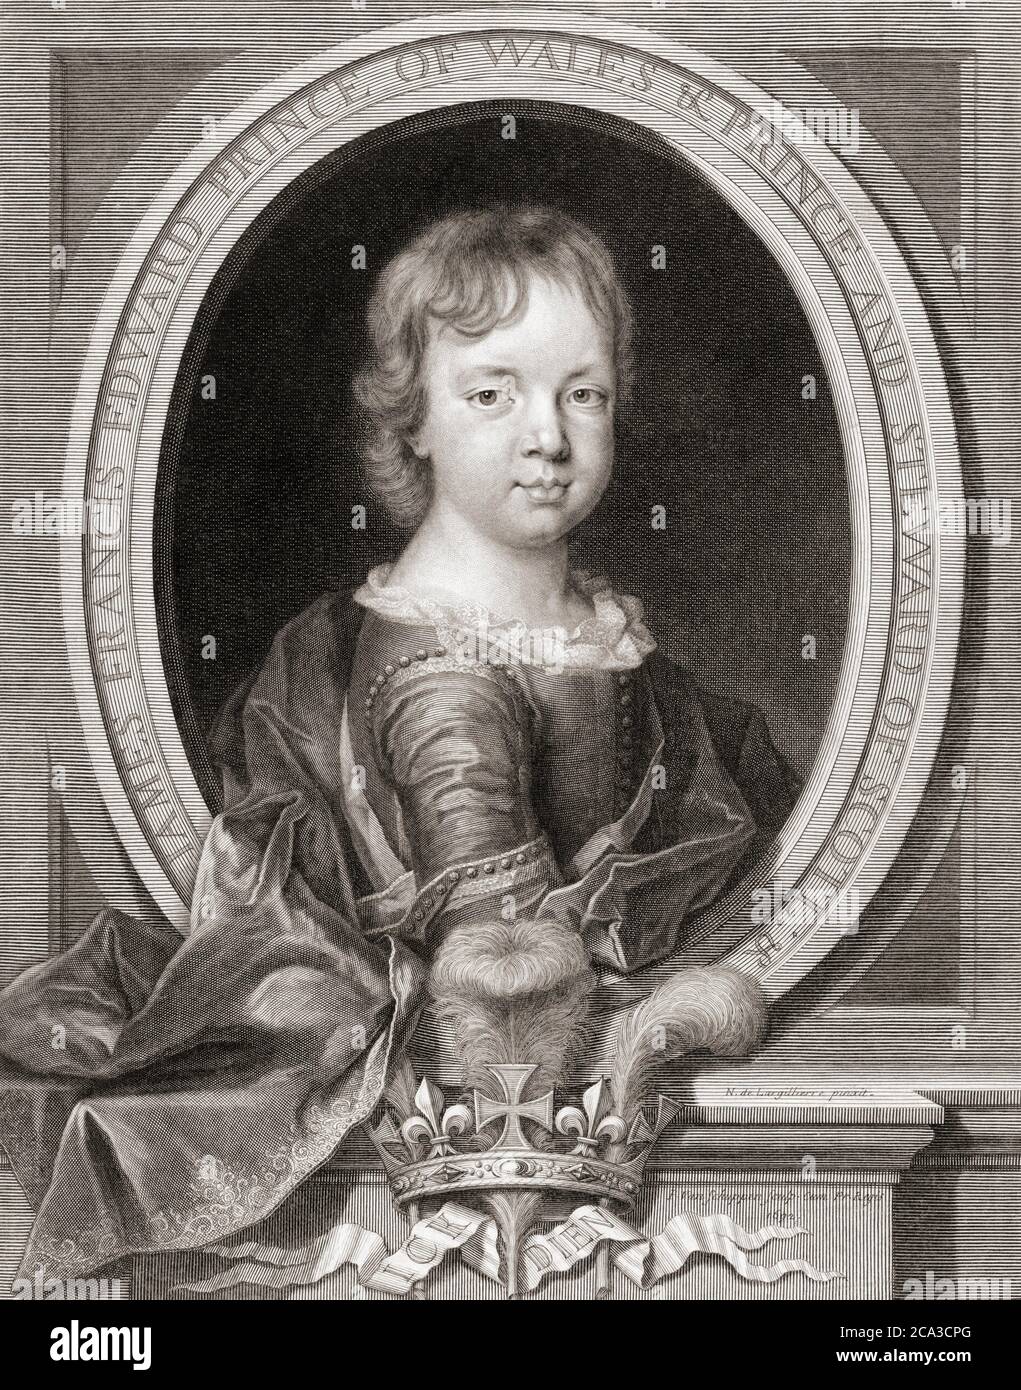 Prince James Francis Edward Stuart, 1688 - 1766. Claimant to the English, Scottish and Irish crowns. Known as the Old Pretender. Seen here as a Stock Photo